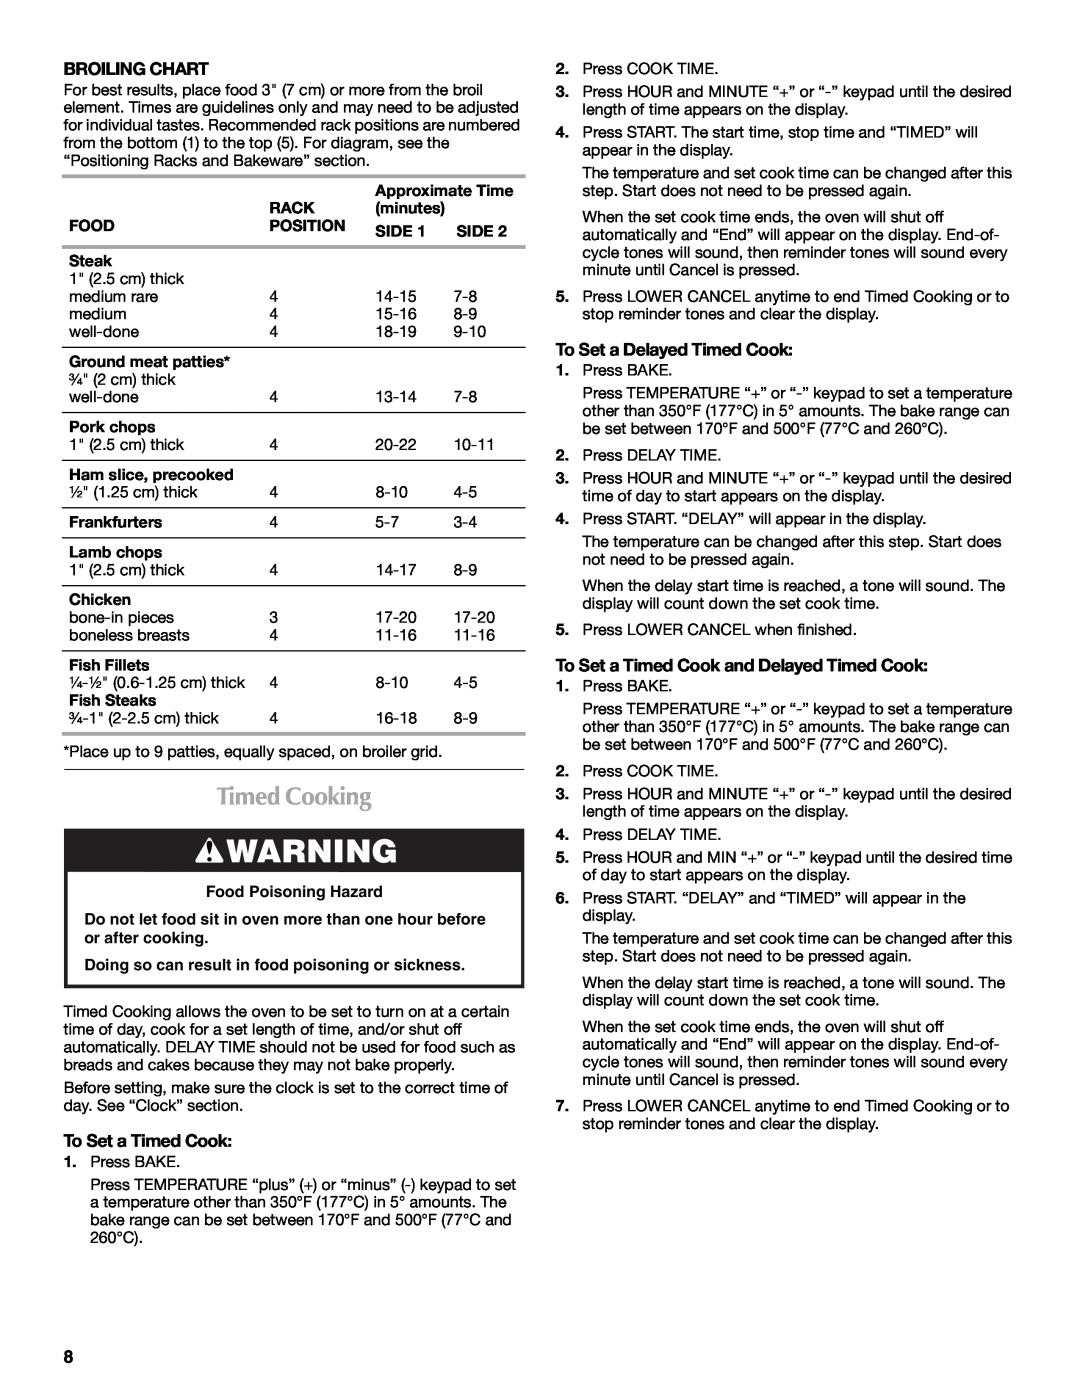 Maytag MMW7530WDS Timed Cooking, Broiling Chart, To Set a Timed Cook, To Set a Delayed Timed Cook, Food Poisoning Hazard 